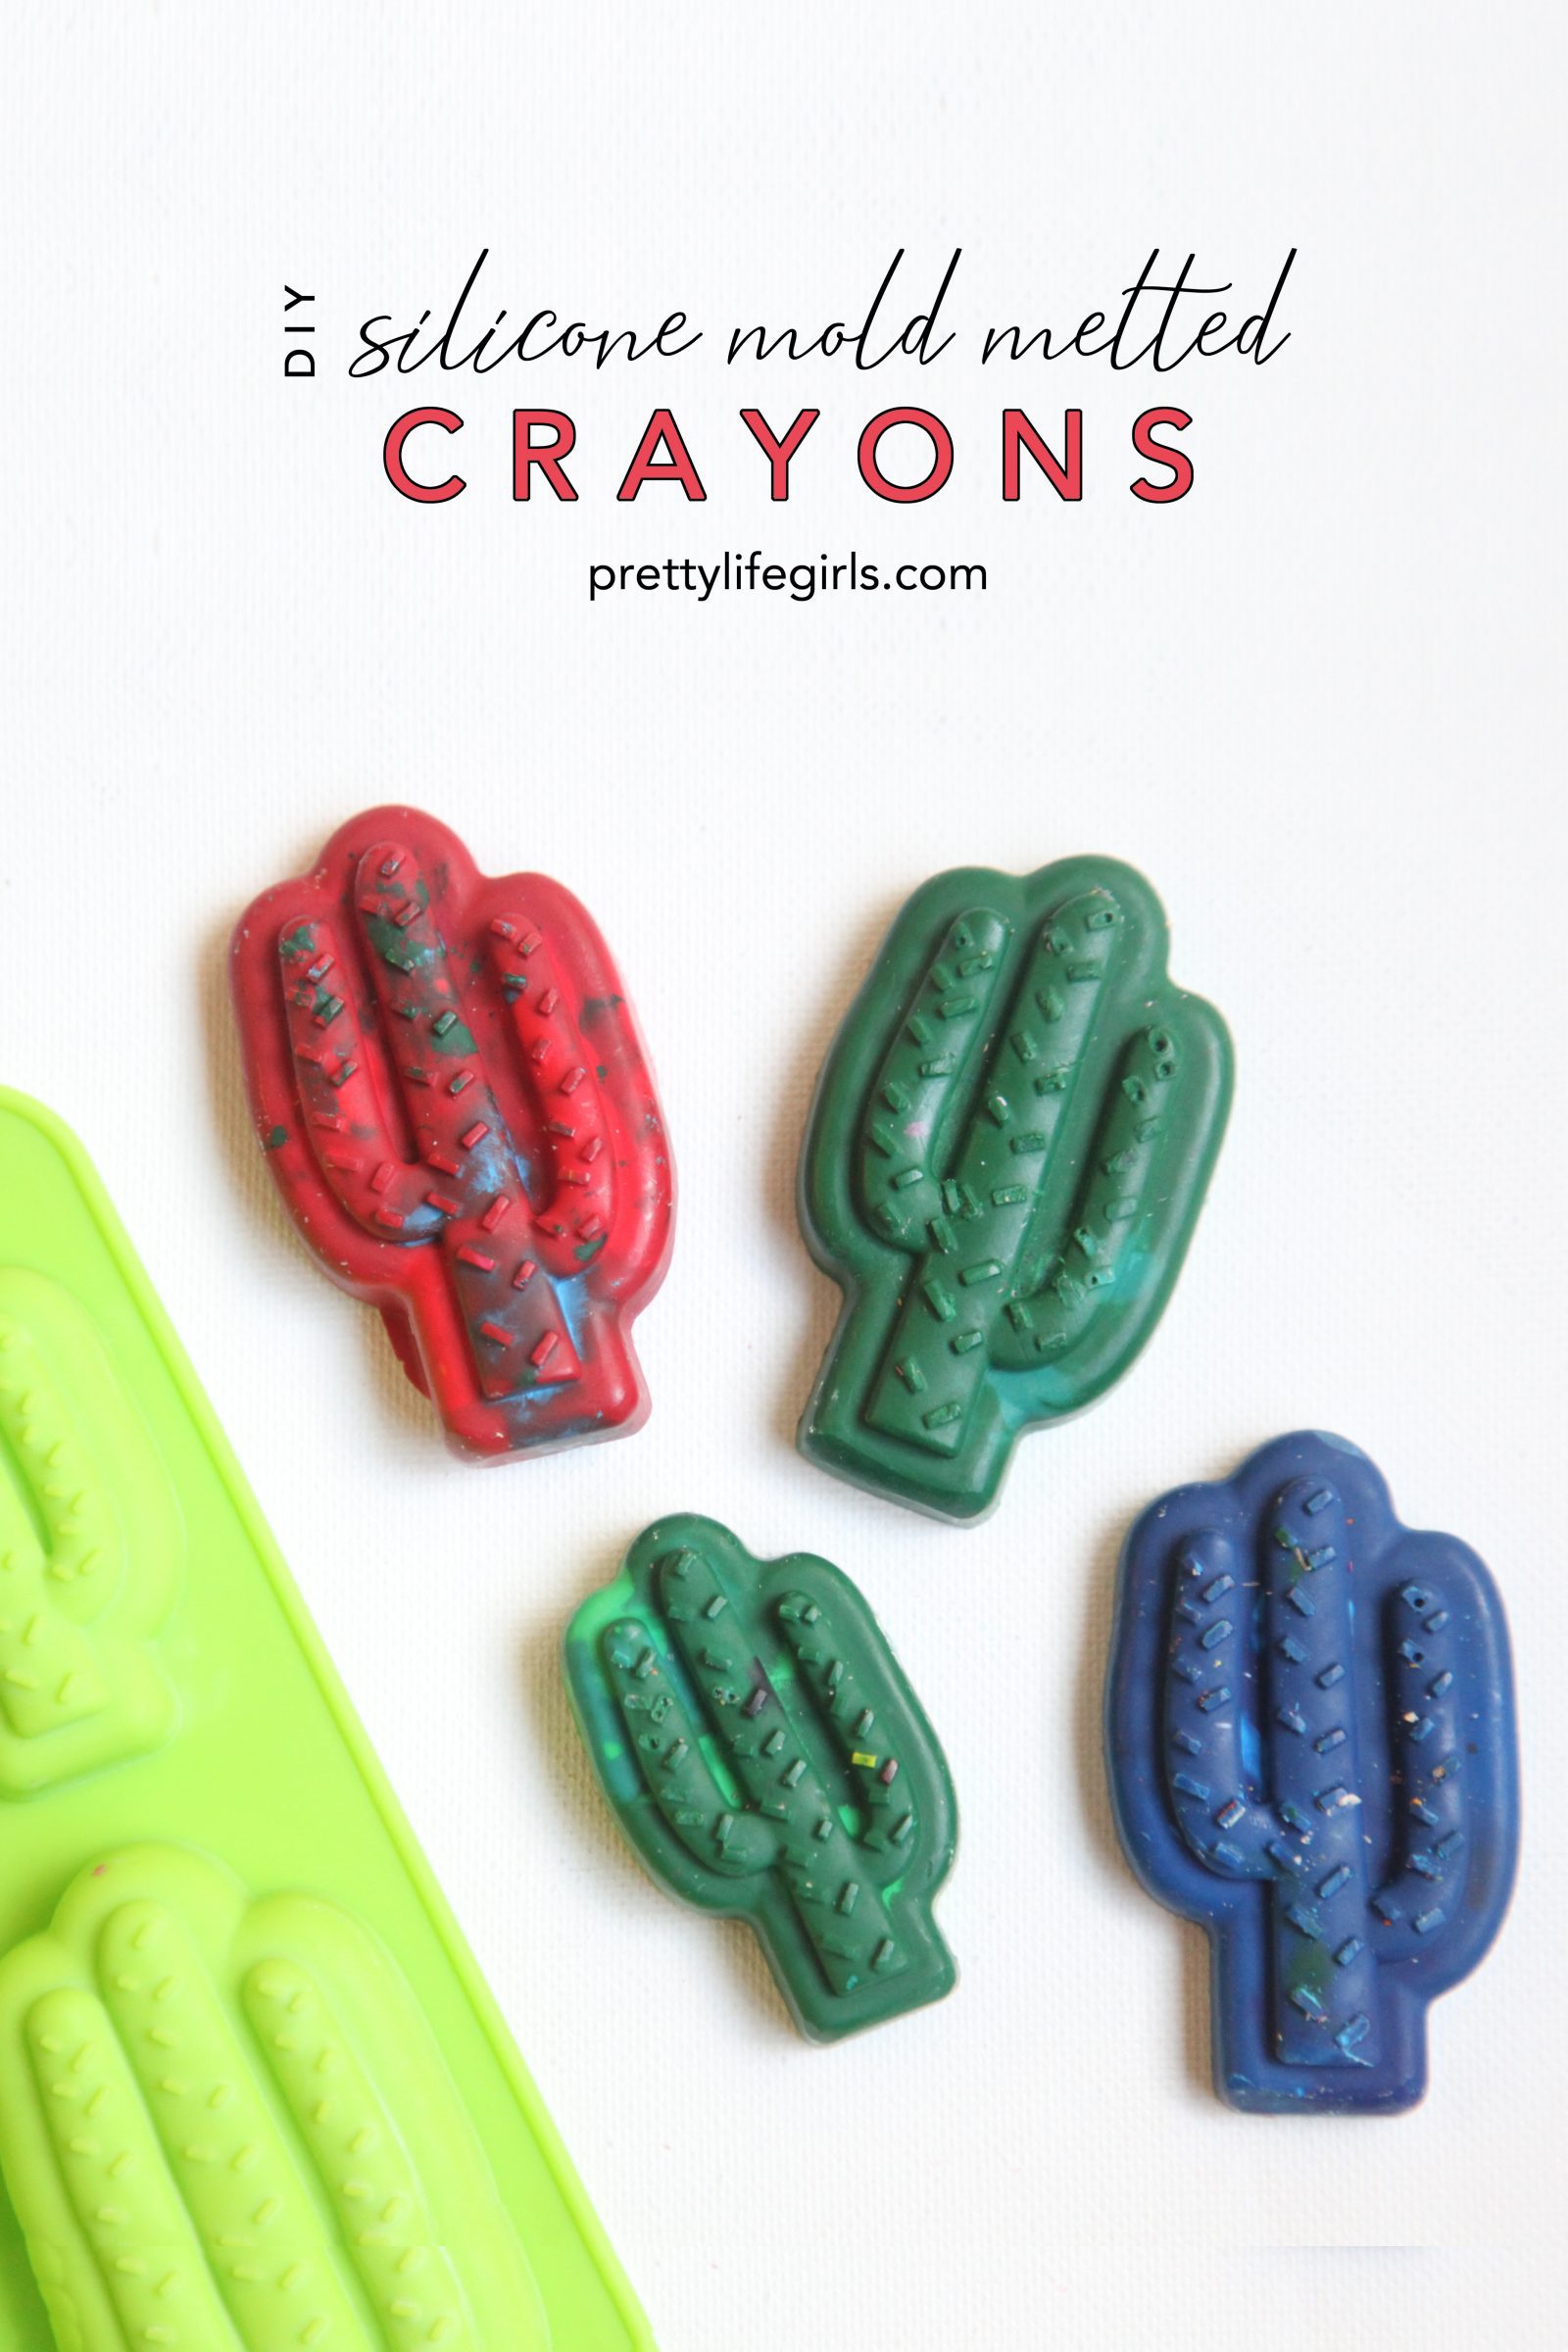 How To Melt Crayons In Silicone Molds The Easy Way - Crafty Art Ideas